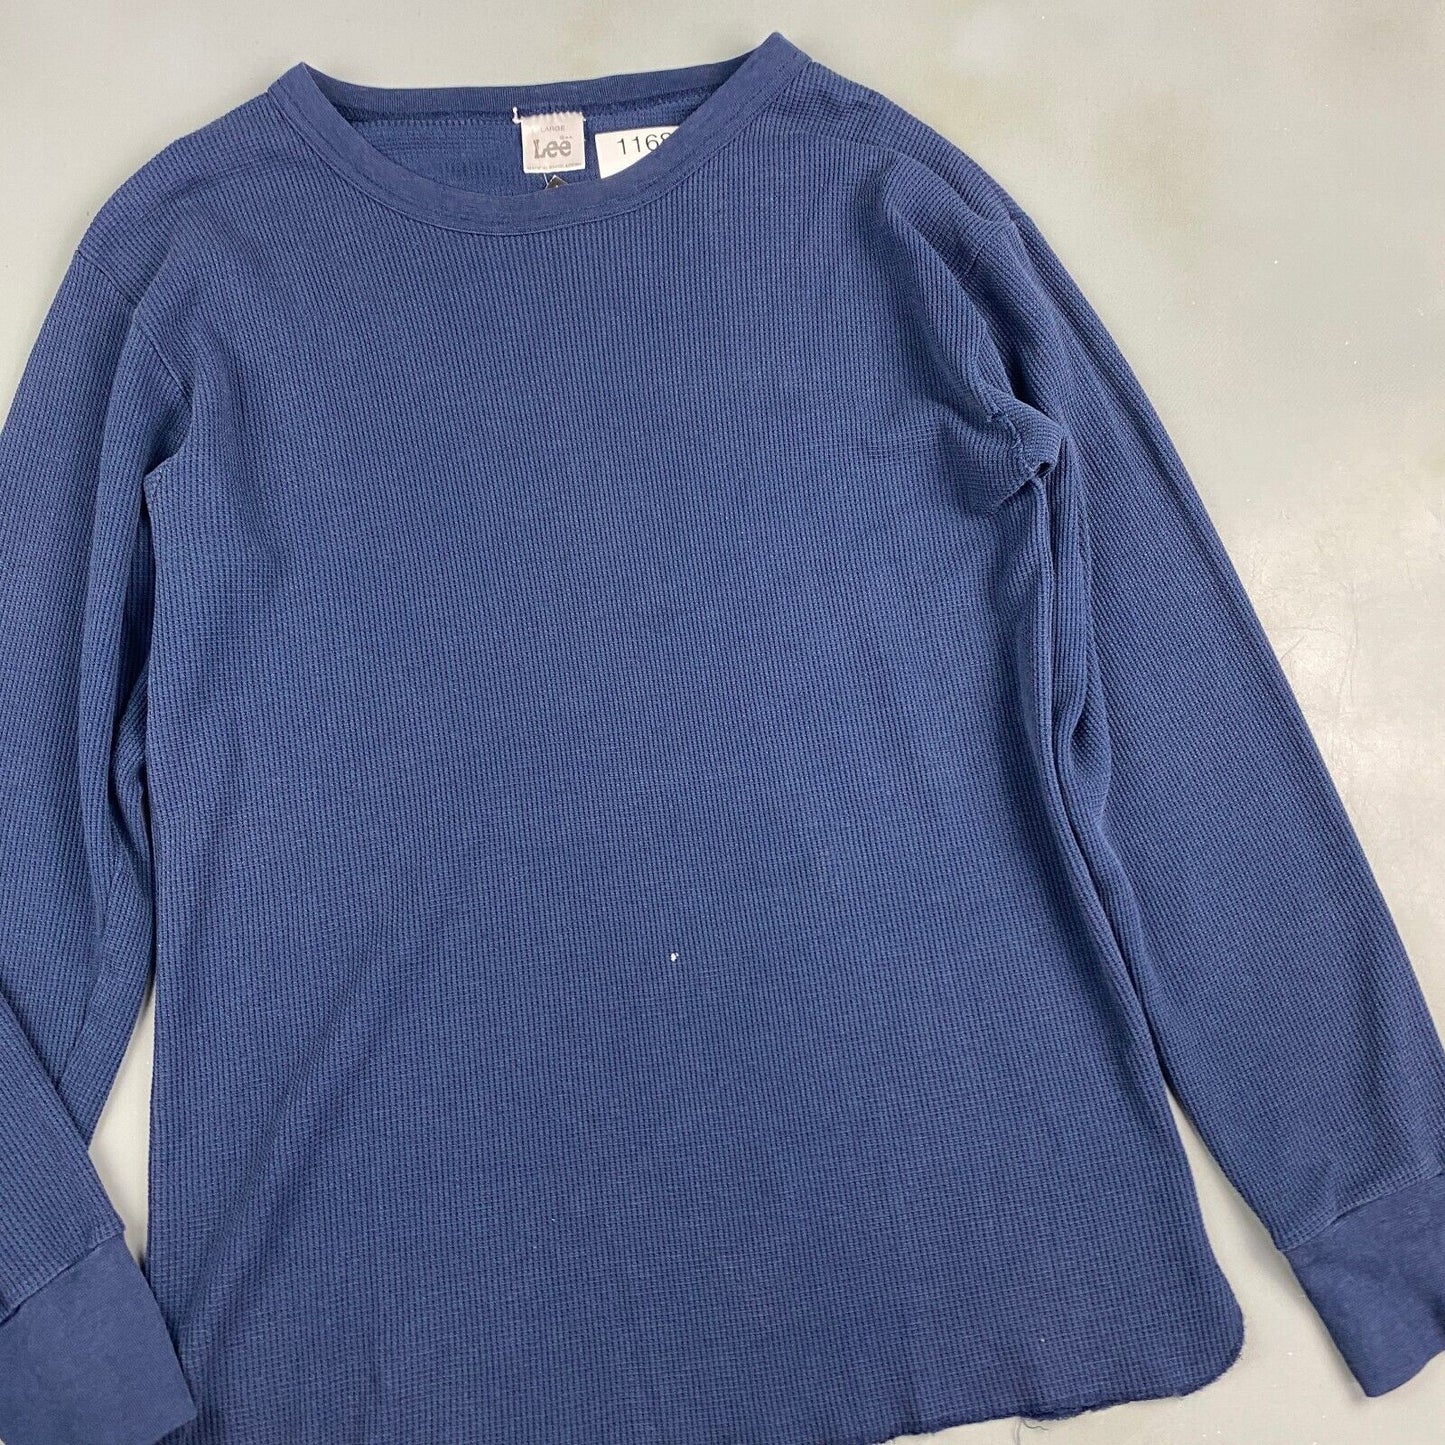 VINTAGE 90s LEE Faded Navy Thermal Long Sleeve T-Shirt sz Large Adult